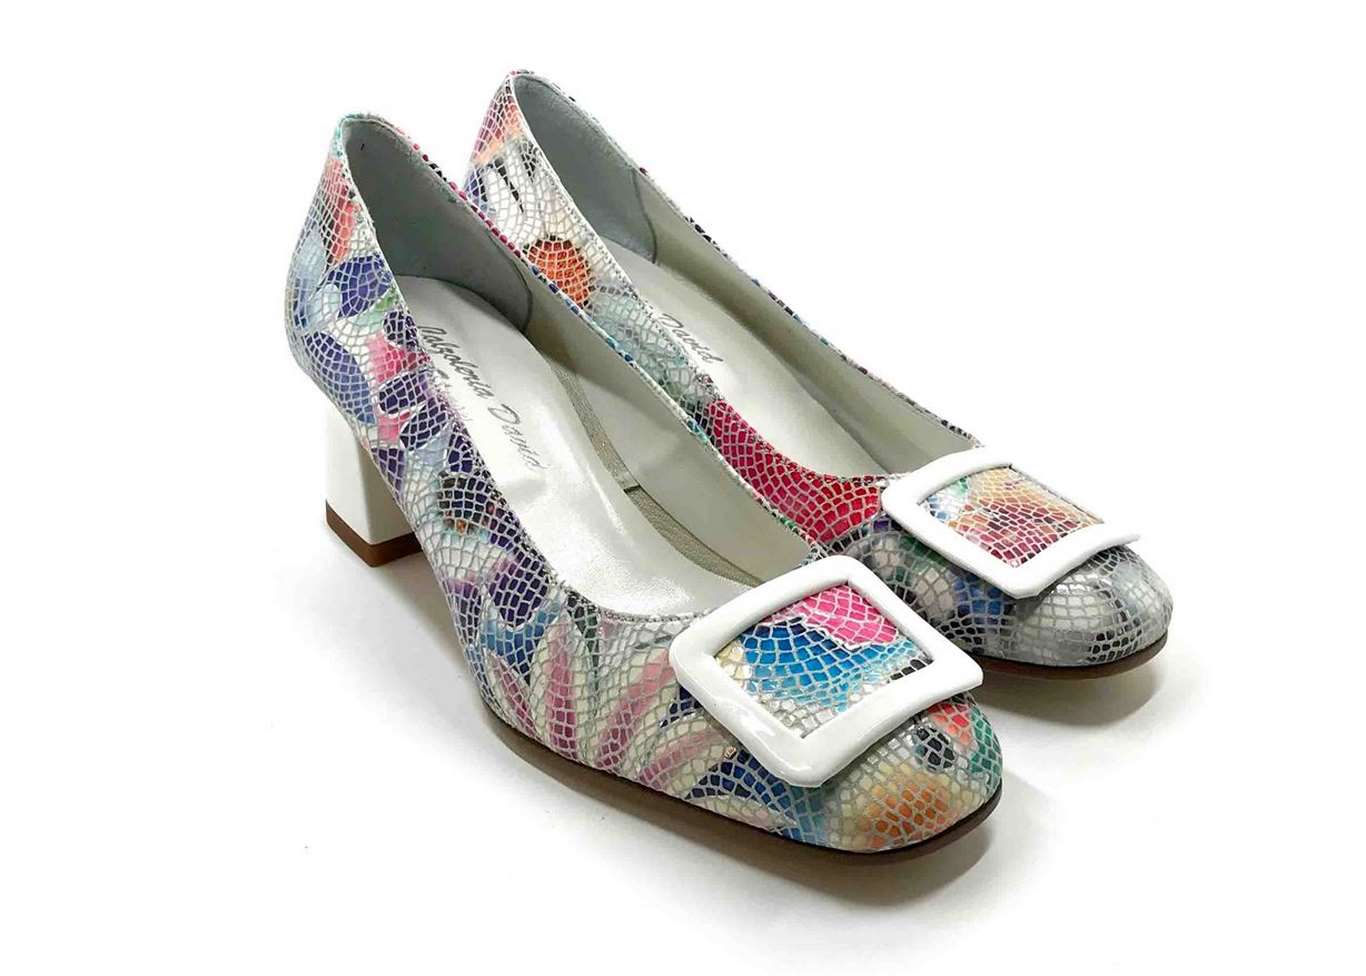 Décolleté Heel 5cm upper in Leather silkscreened Lawn White, heel and buckle in White calfskin